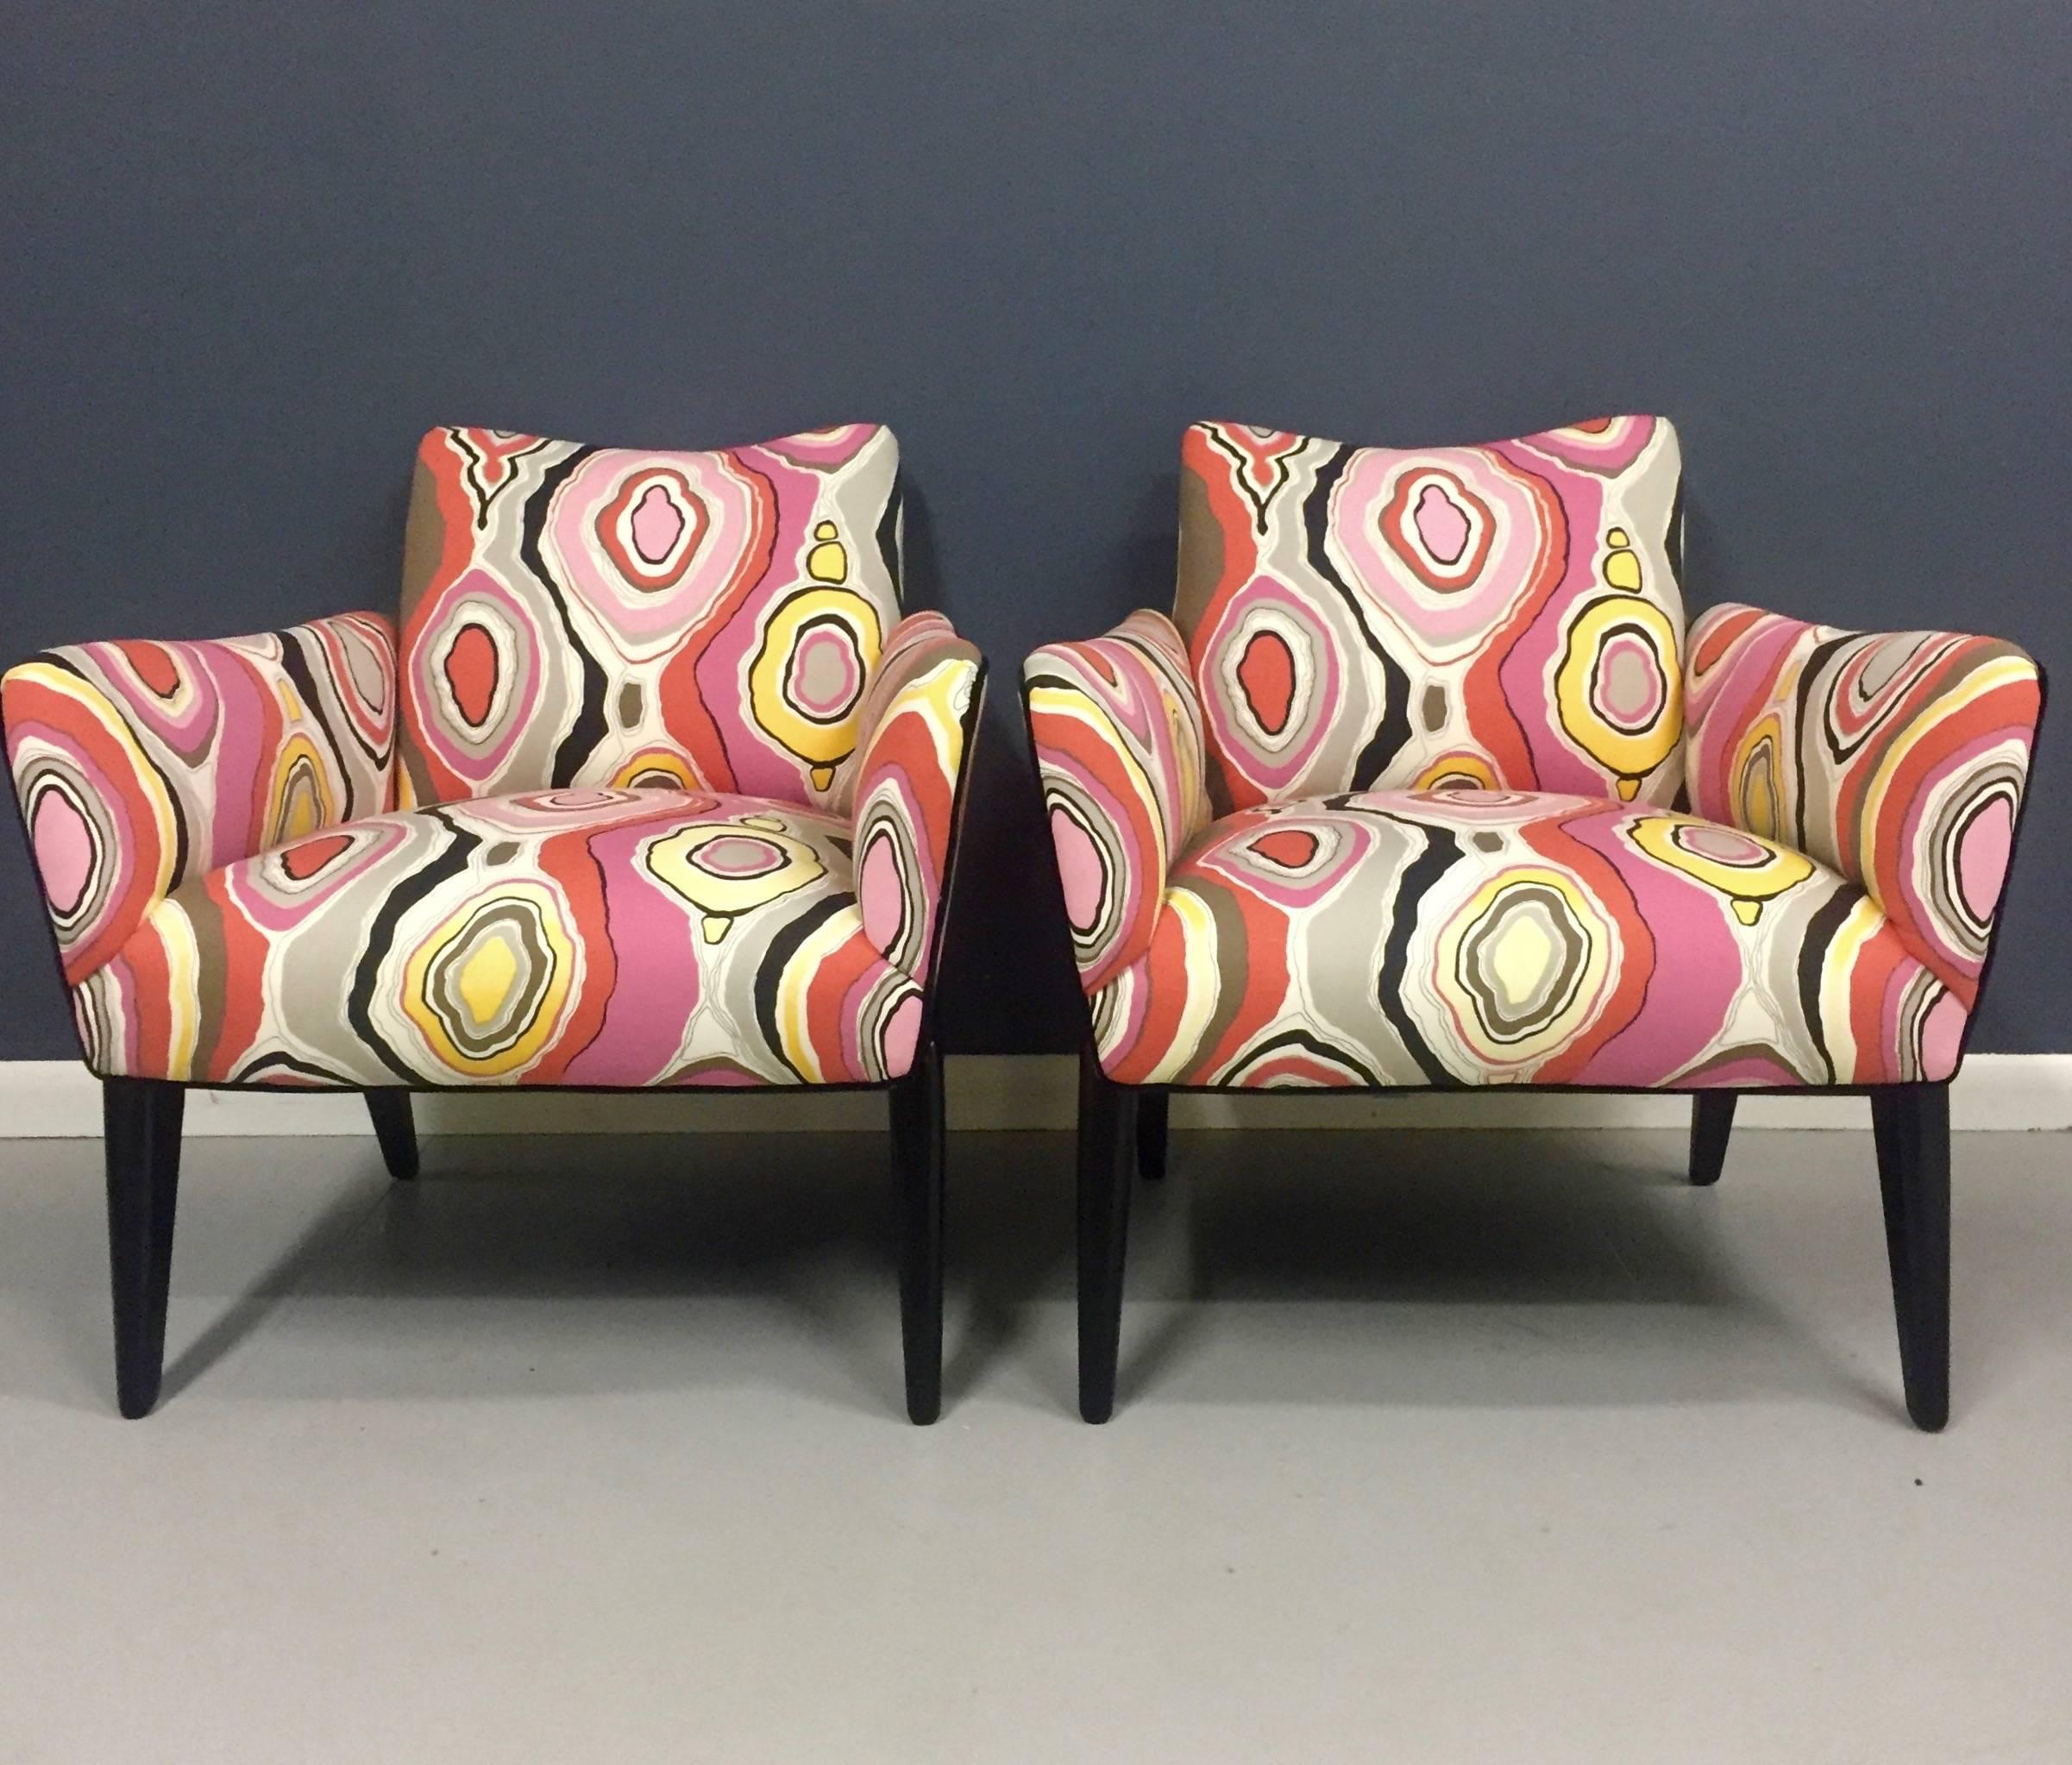 Italian lounge chairs after Ico Parisi with ebonized base, upholstered in Pucci style fabric.

Ico & Luisa Parisi were working in the same period as Paola Buffa, their friend Gio Ponti and Silvio Longhi.